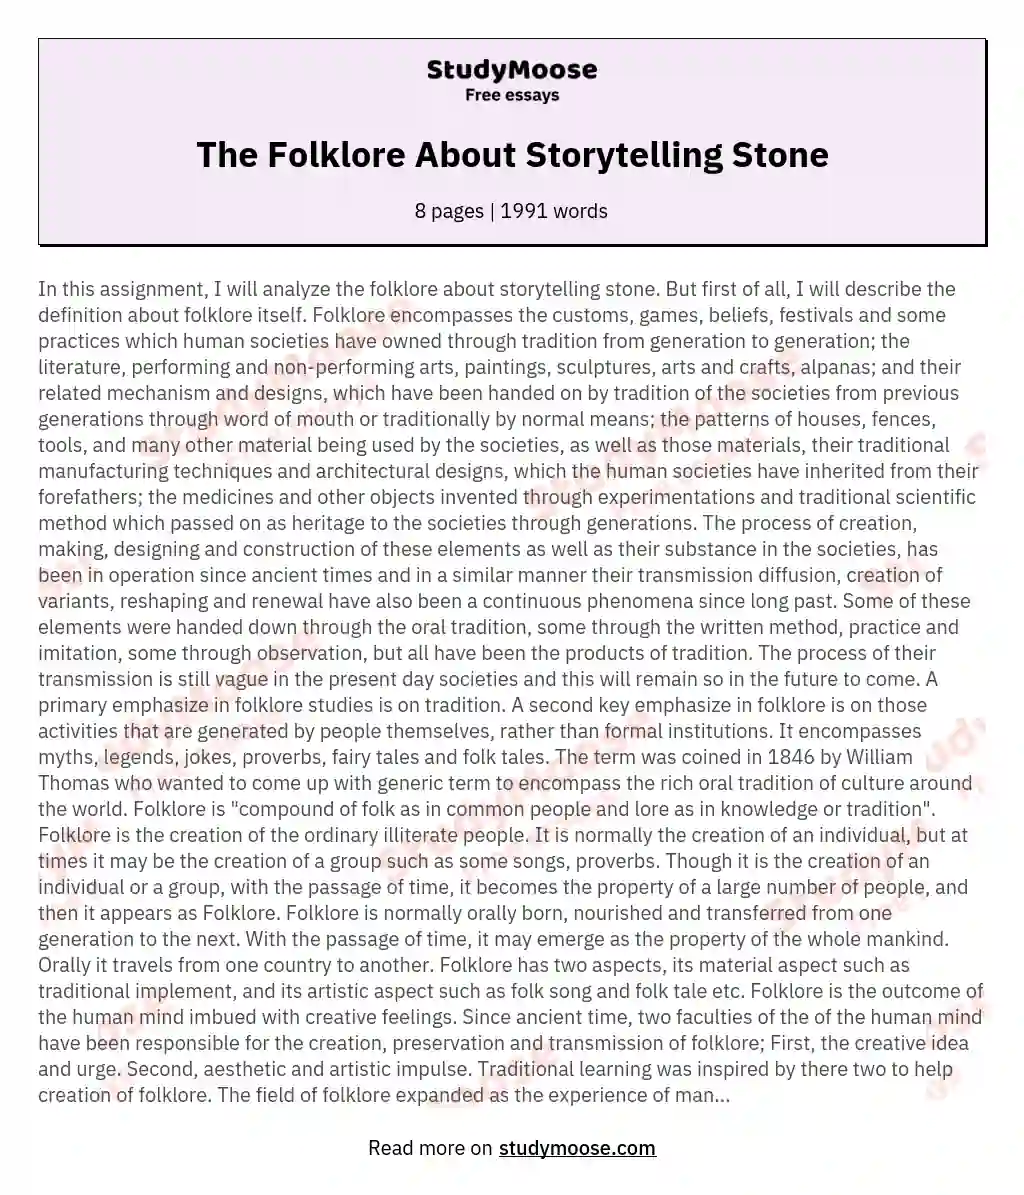 The Folklore About Storytelling Stone essay